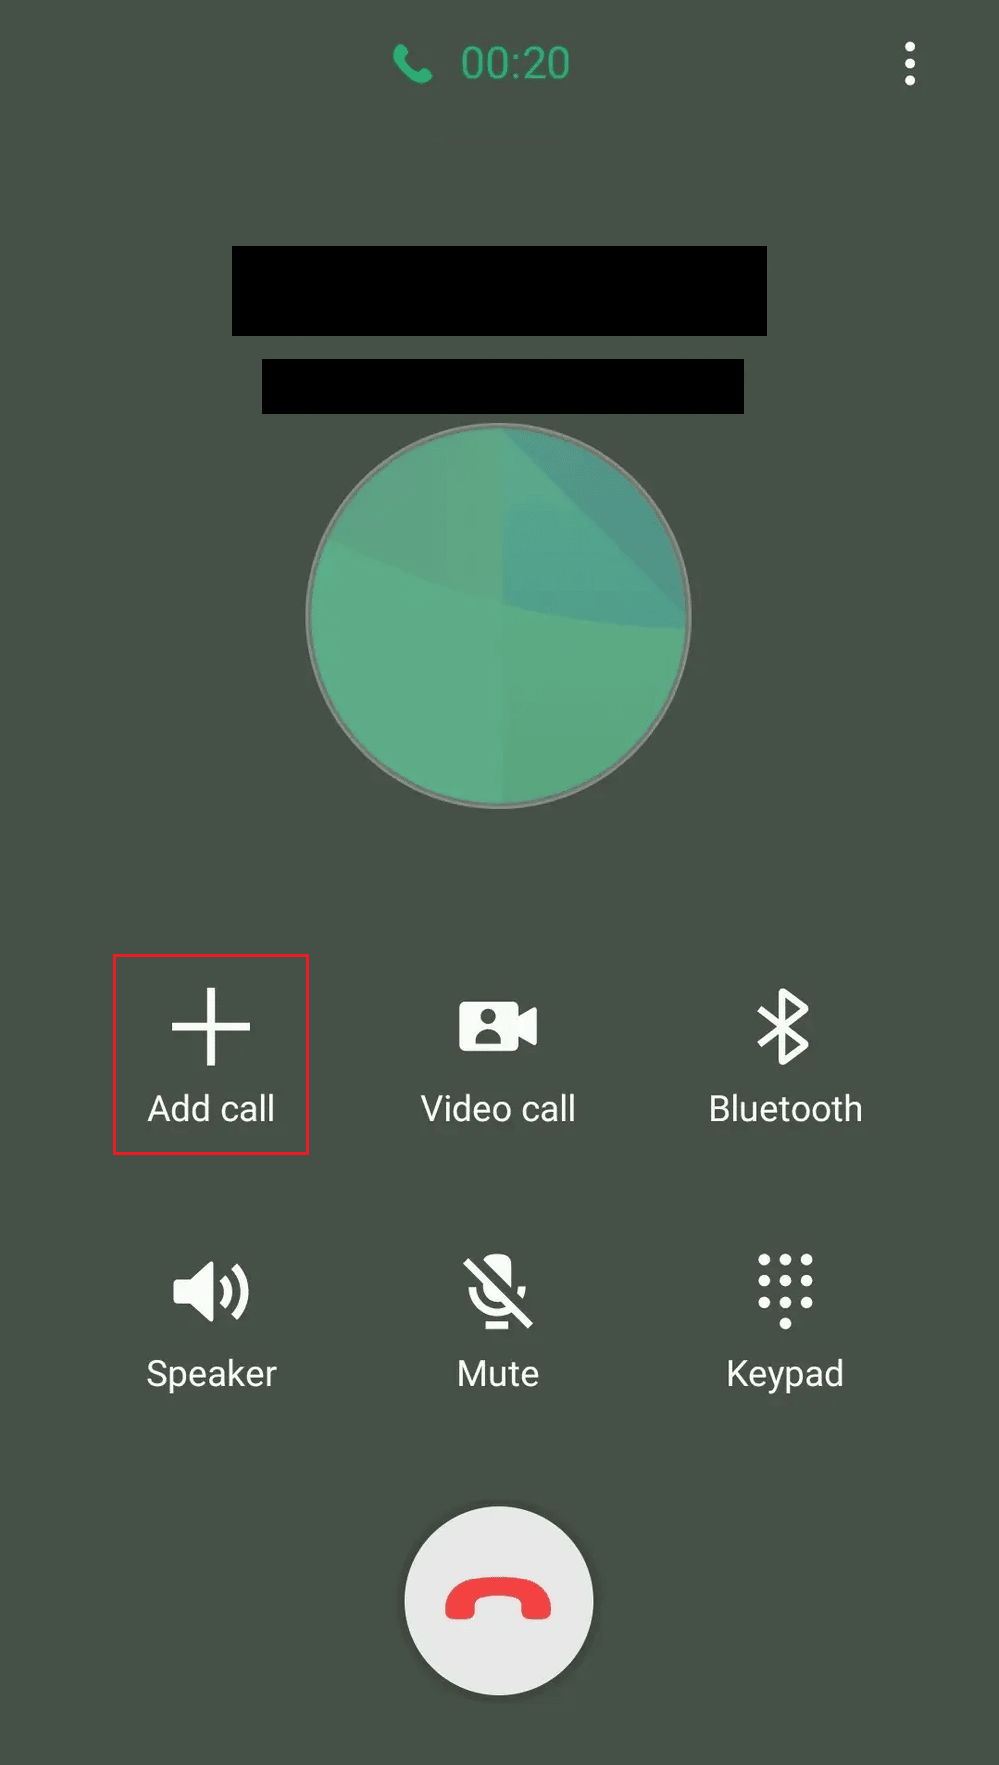 After the call is connected, tap on Add call from the menu options